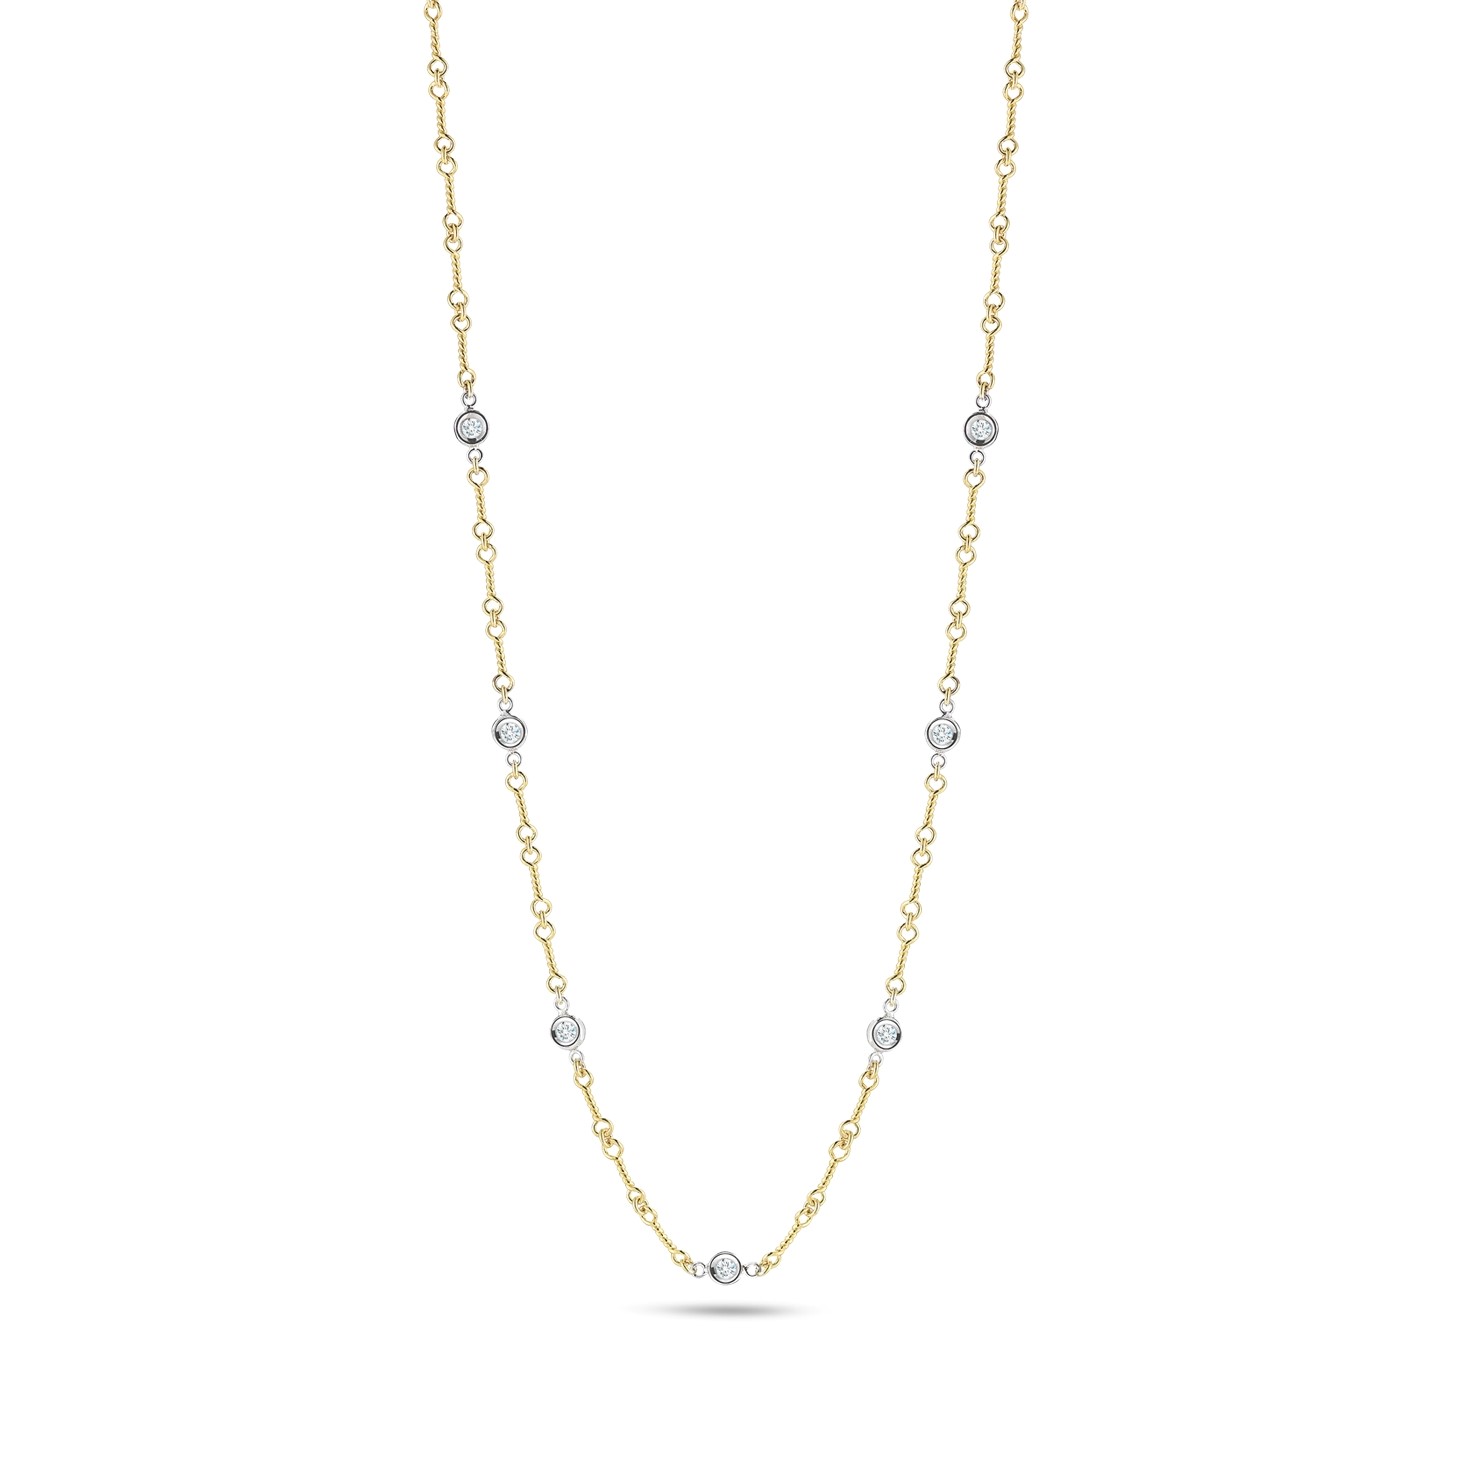 Roberto Coin 18K Yellow and White Gold Diamonds by the Inch 7 Station Dogbone Necklace